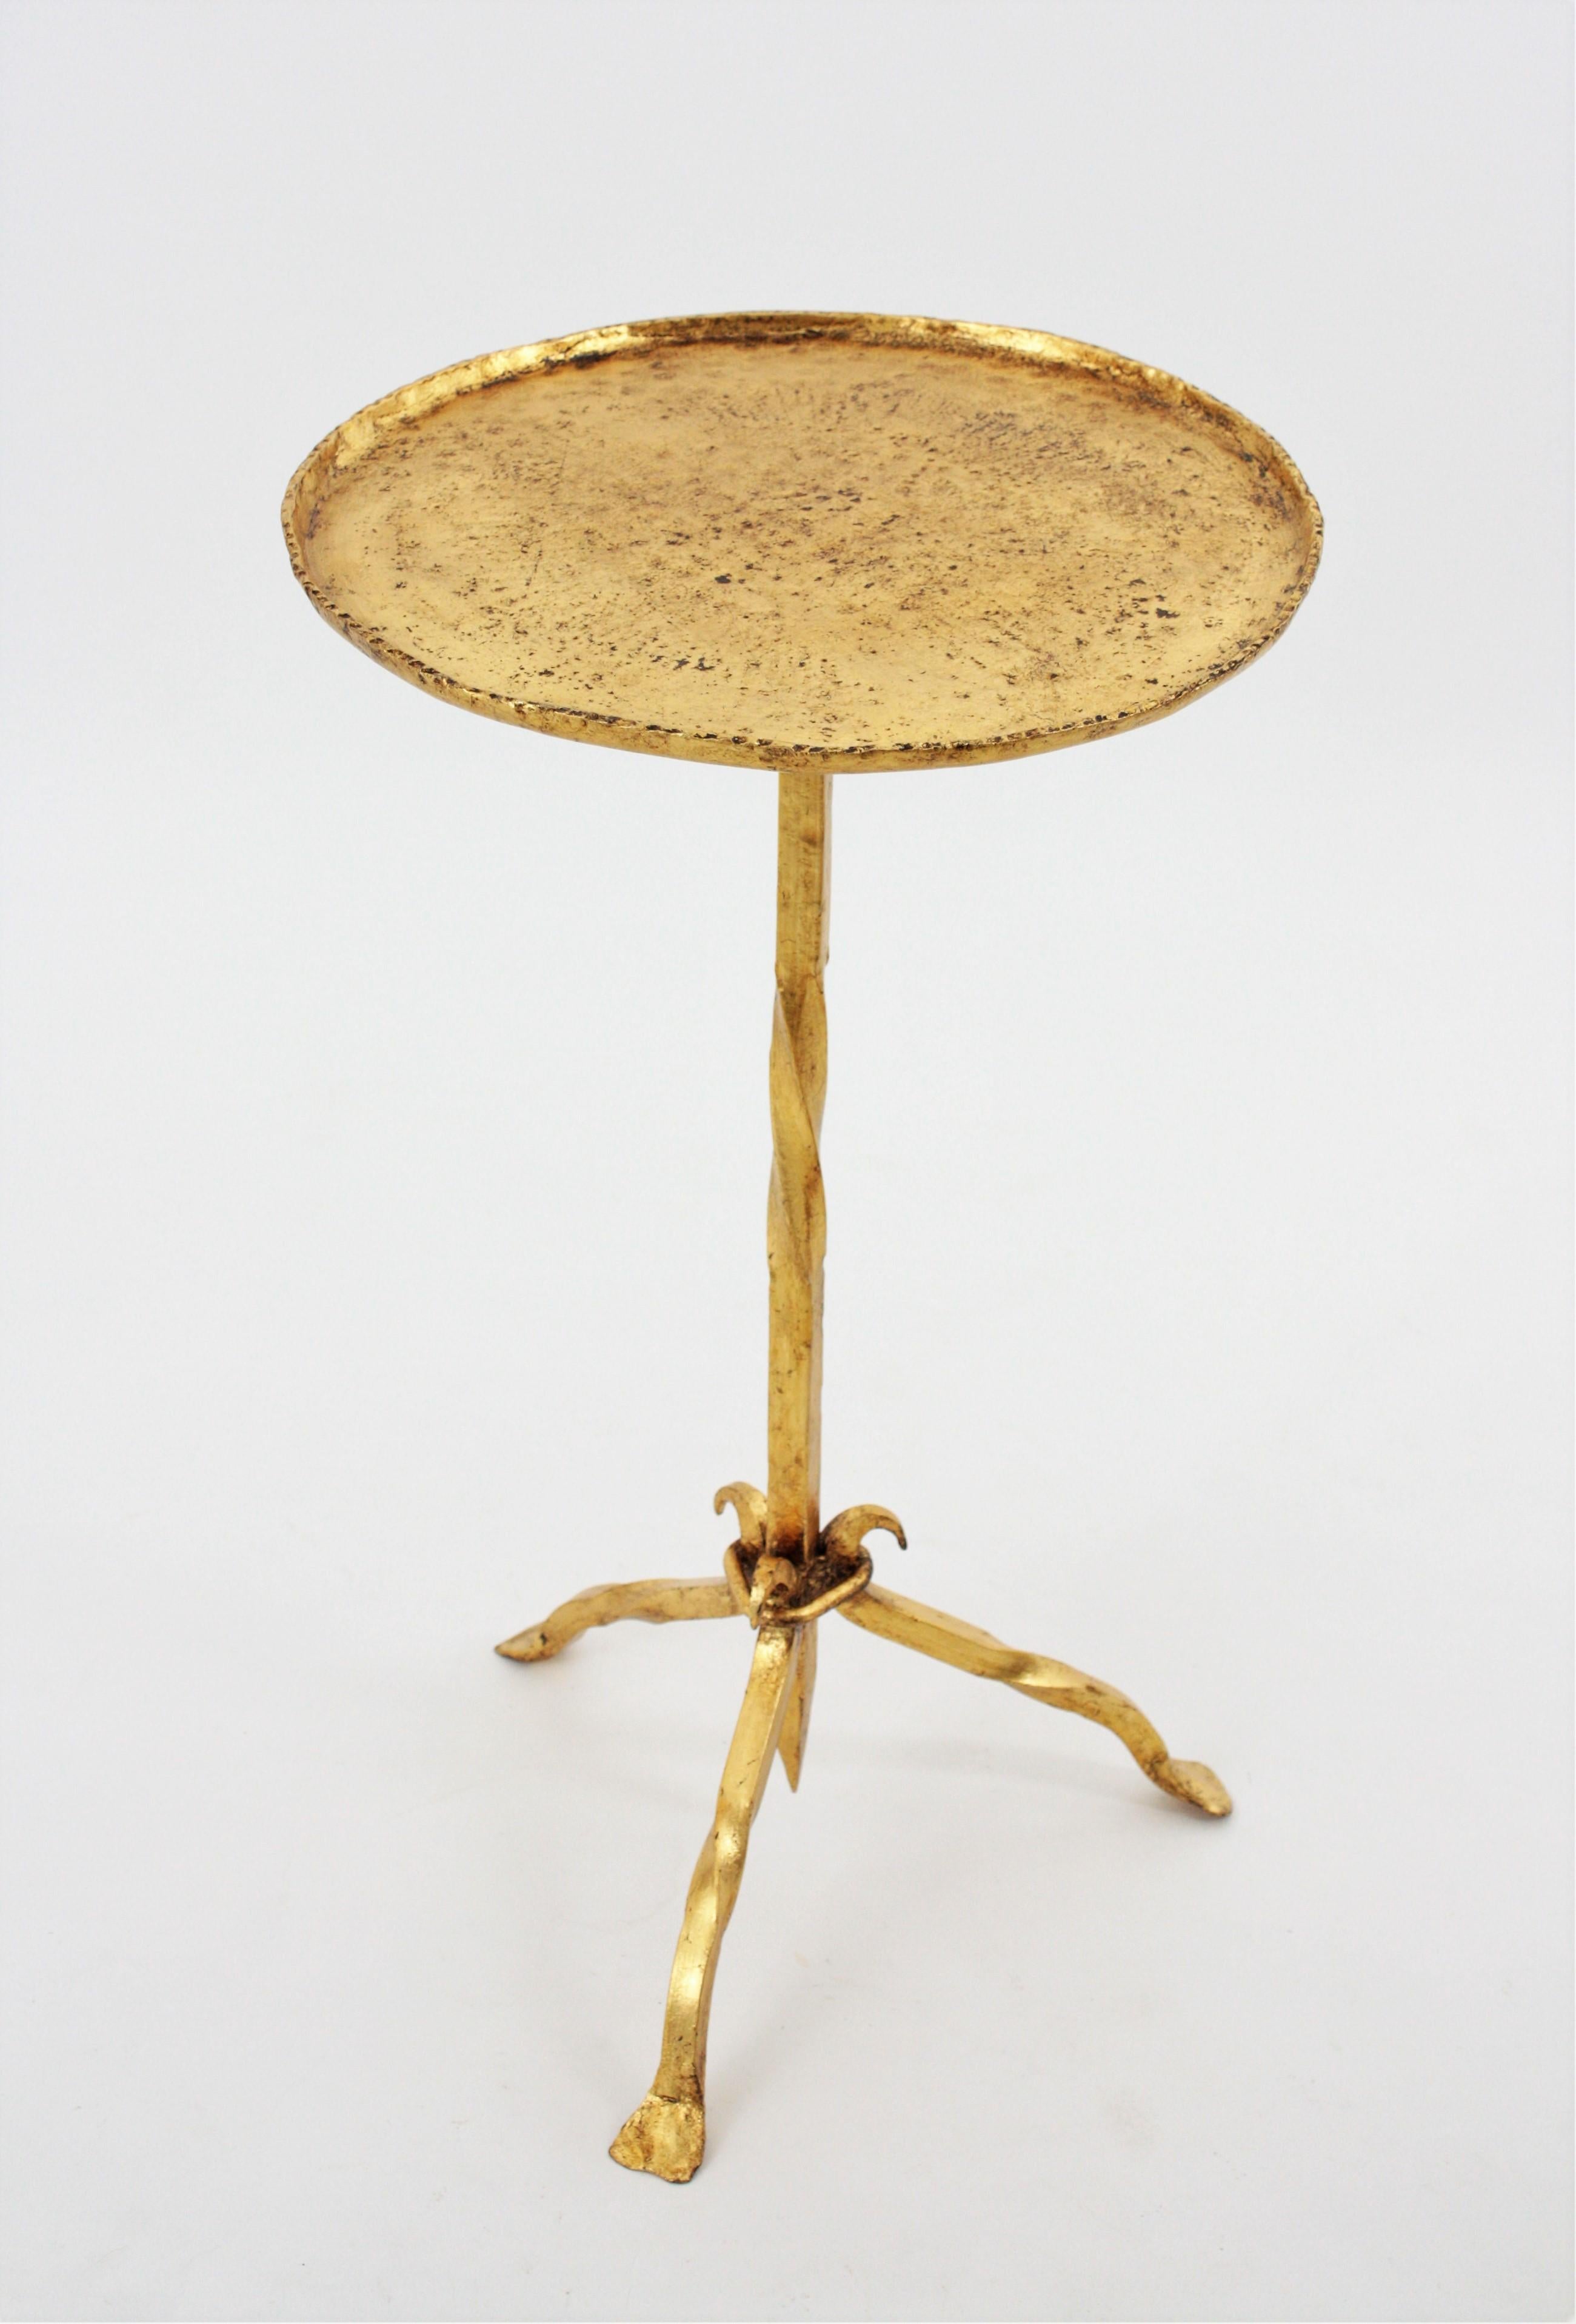 Gothic Revival  Spanish Gothic Style Gold Leaf Gilt Iron Drinks Table, Stand or Side Table 